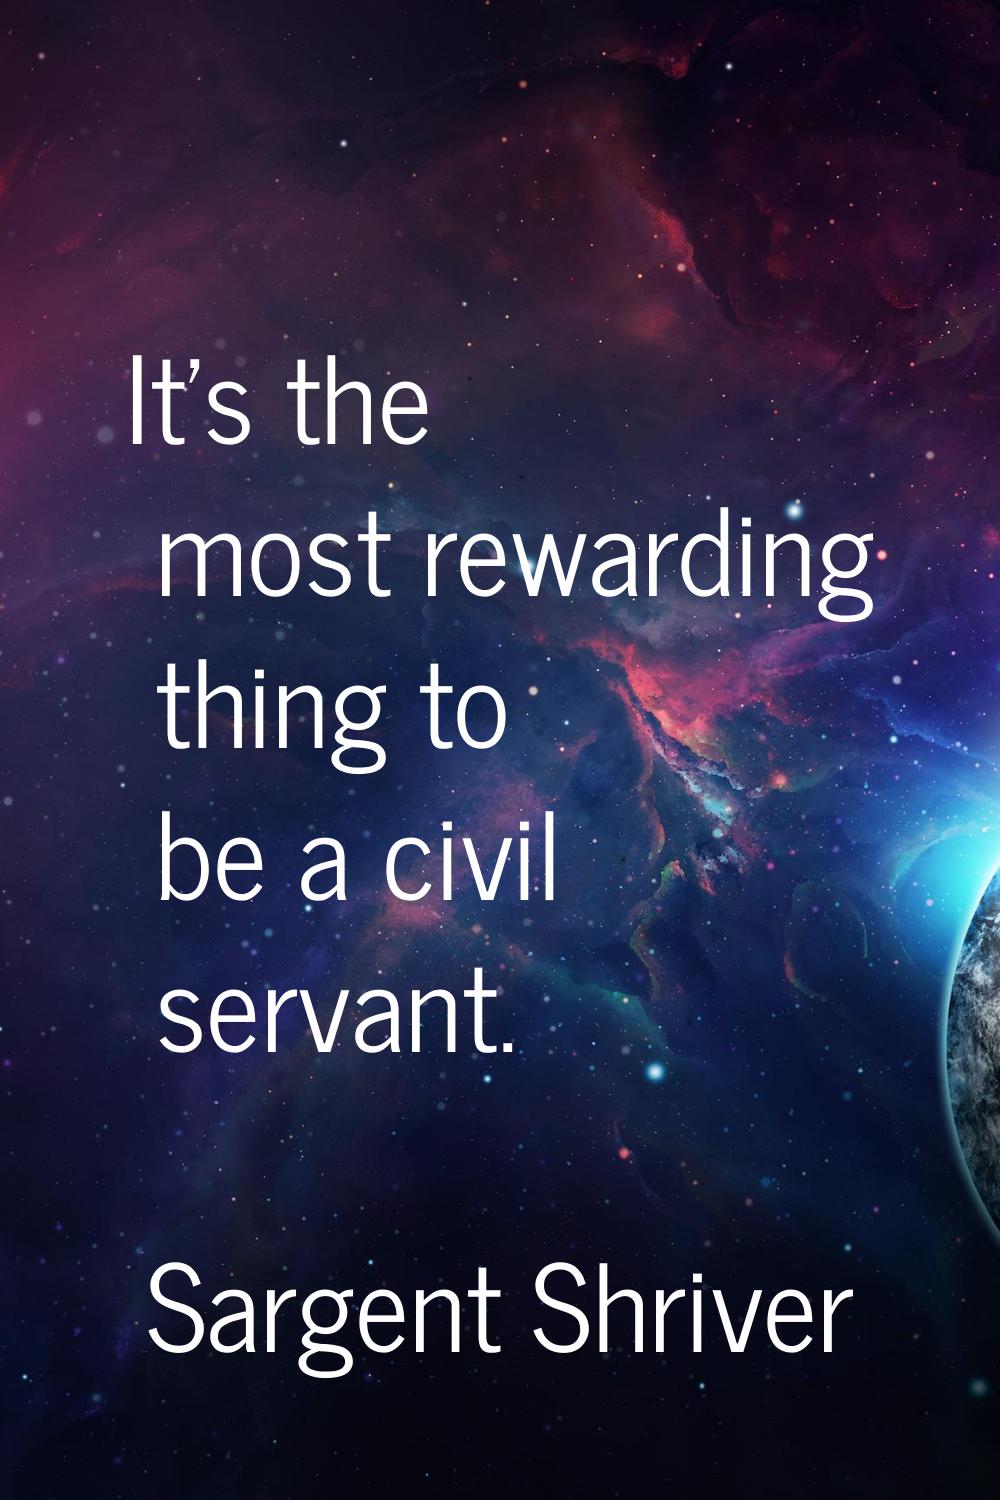 It's the most rewarding thing to be a civil servant.